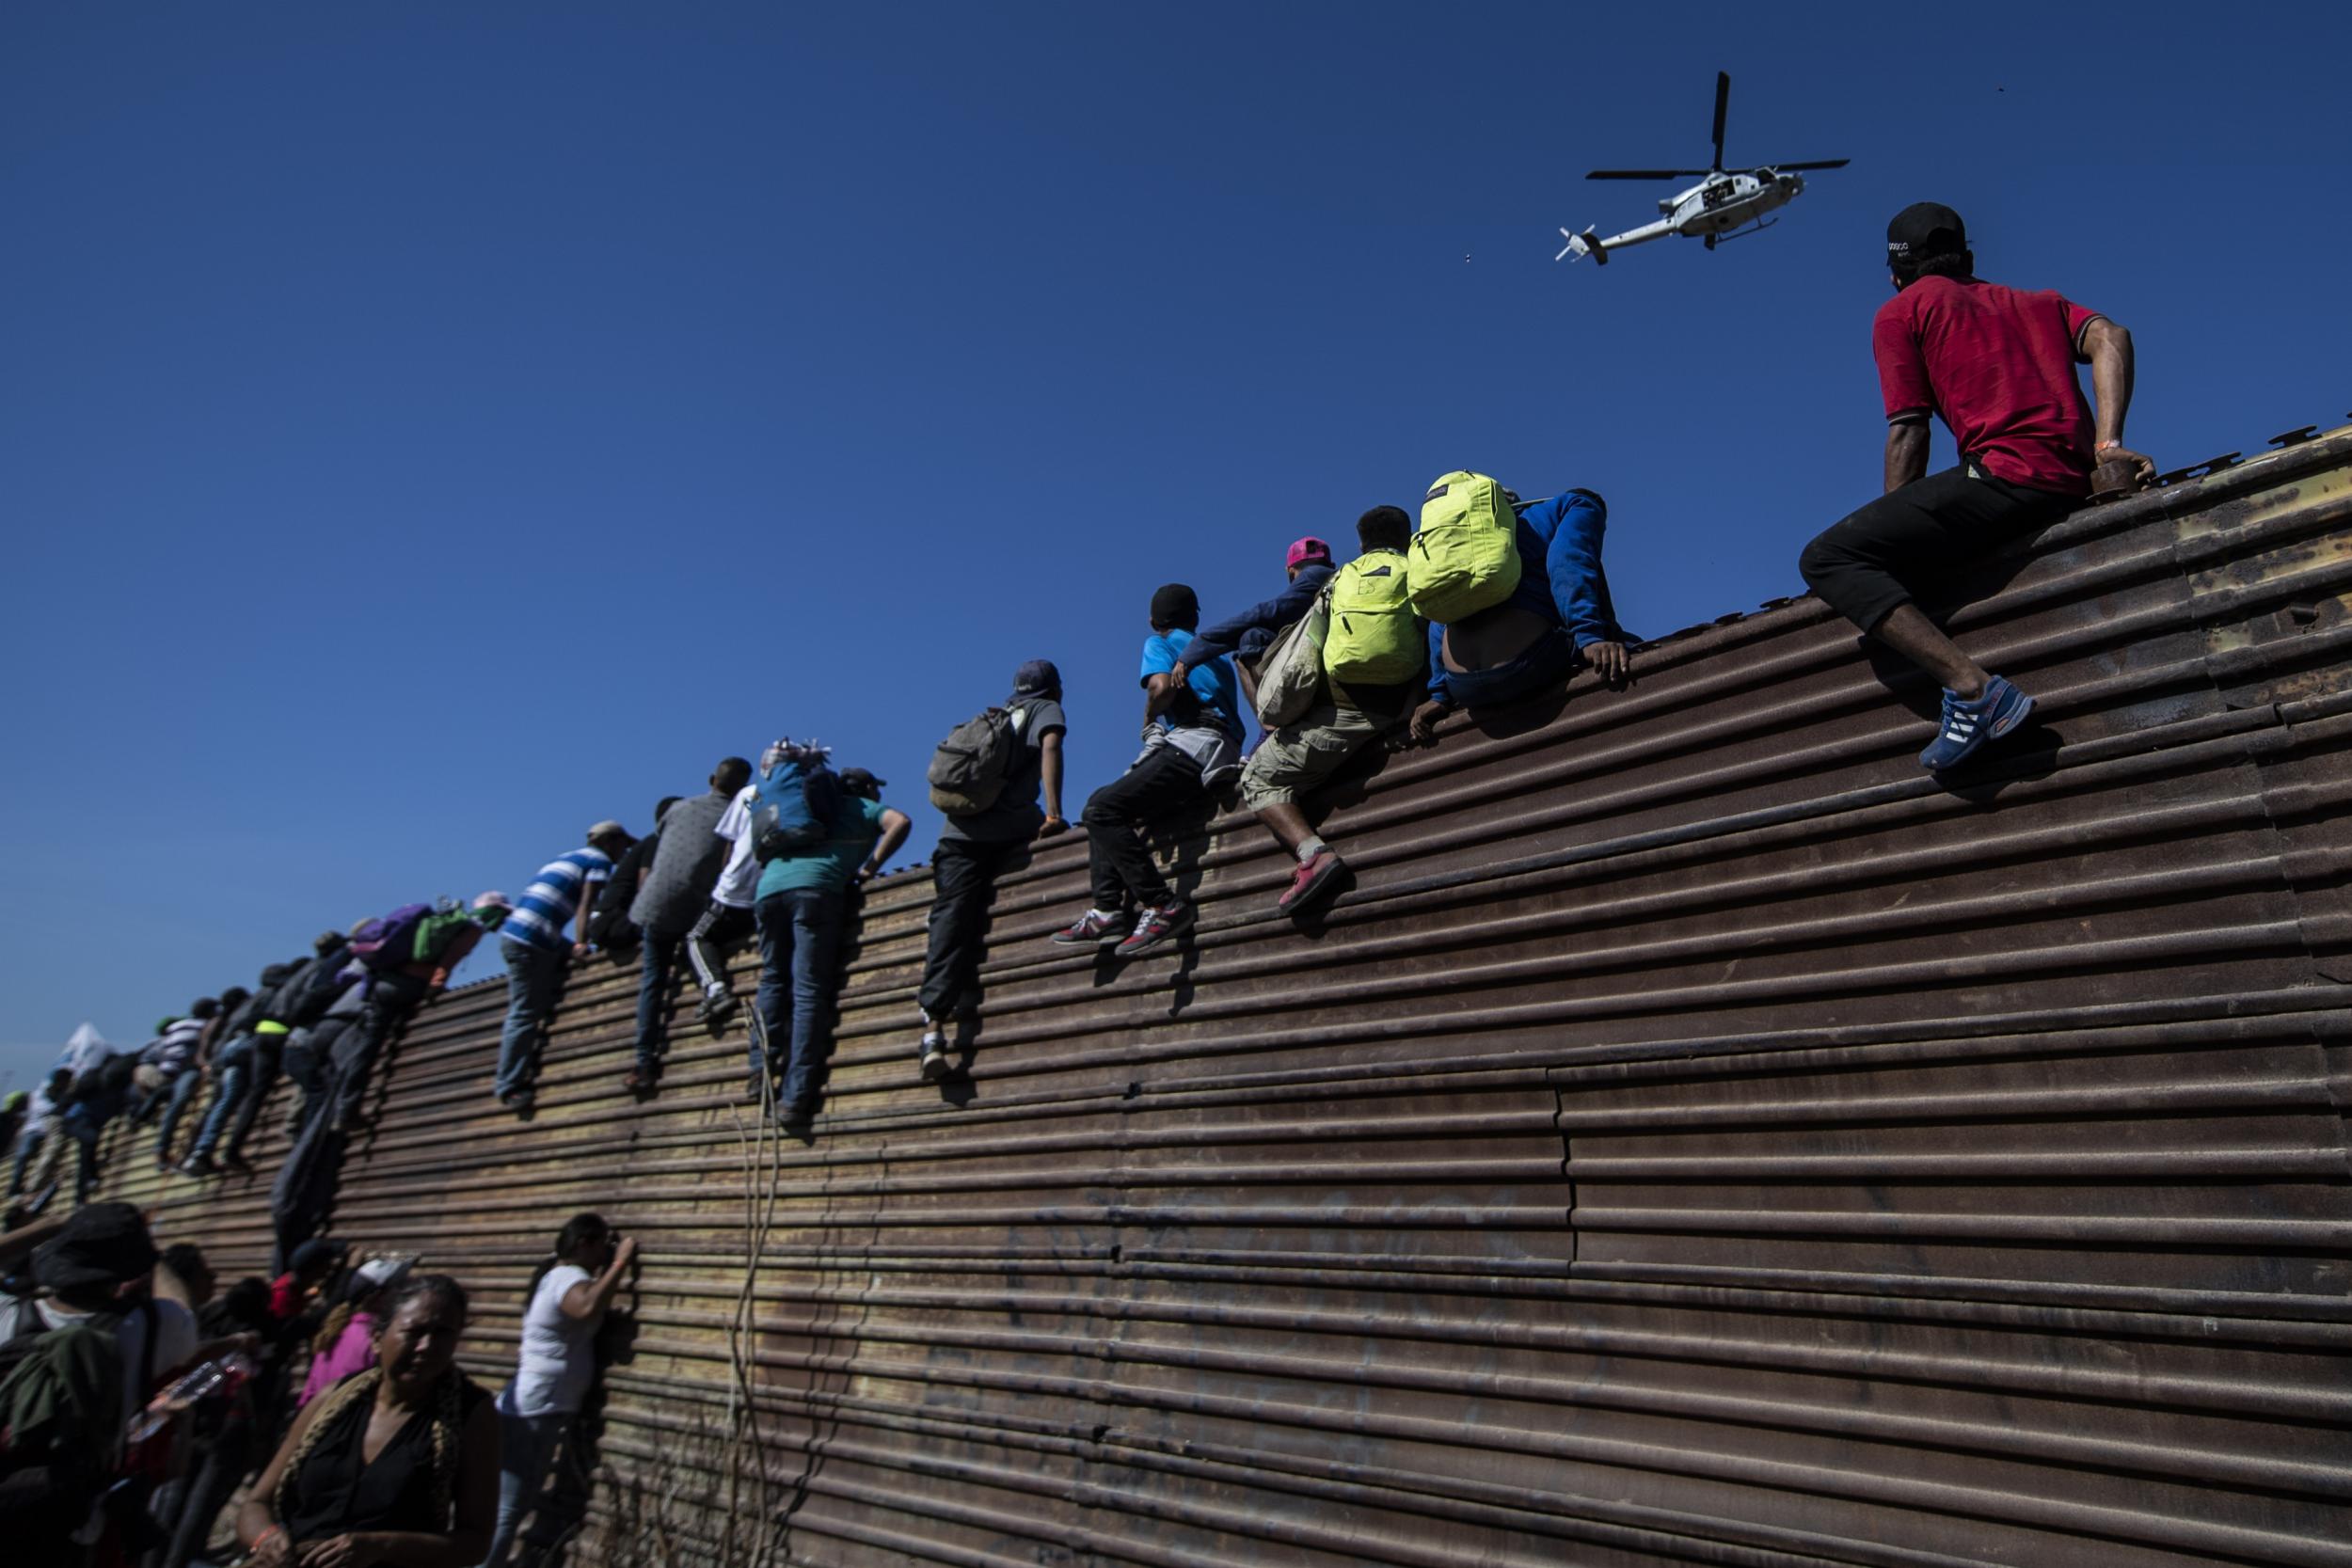 A group of Central American migrants climb a metal barrier on the Mexico-US border near El Chaparral border crossing in 2018.